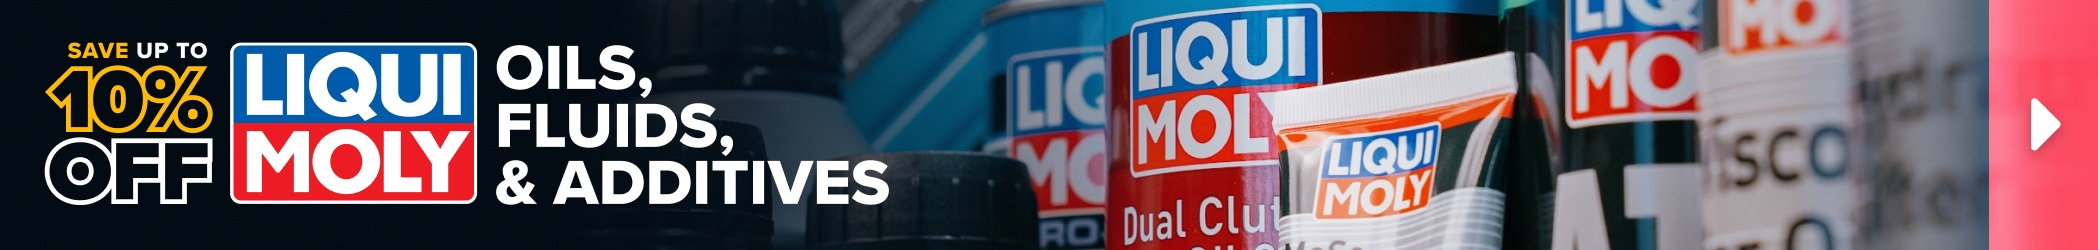 Liqui Moly Sri Lanka - Why you need to use a FUEL ADDITIVE - Use Liqui Moly  Injection Cleaner Our products are Made in Germany to the highest levels of  quality. Available